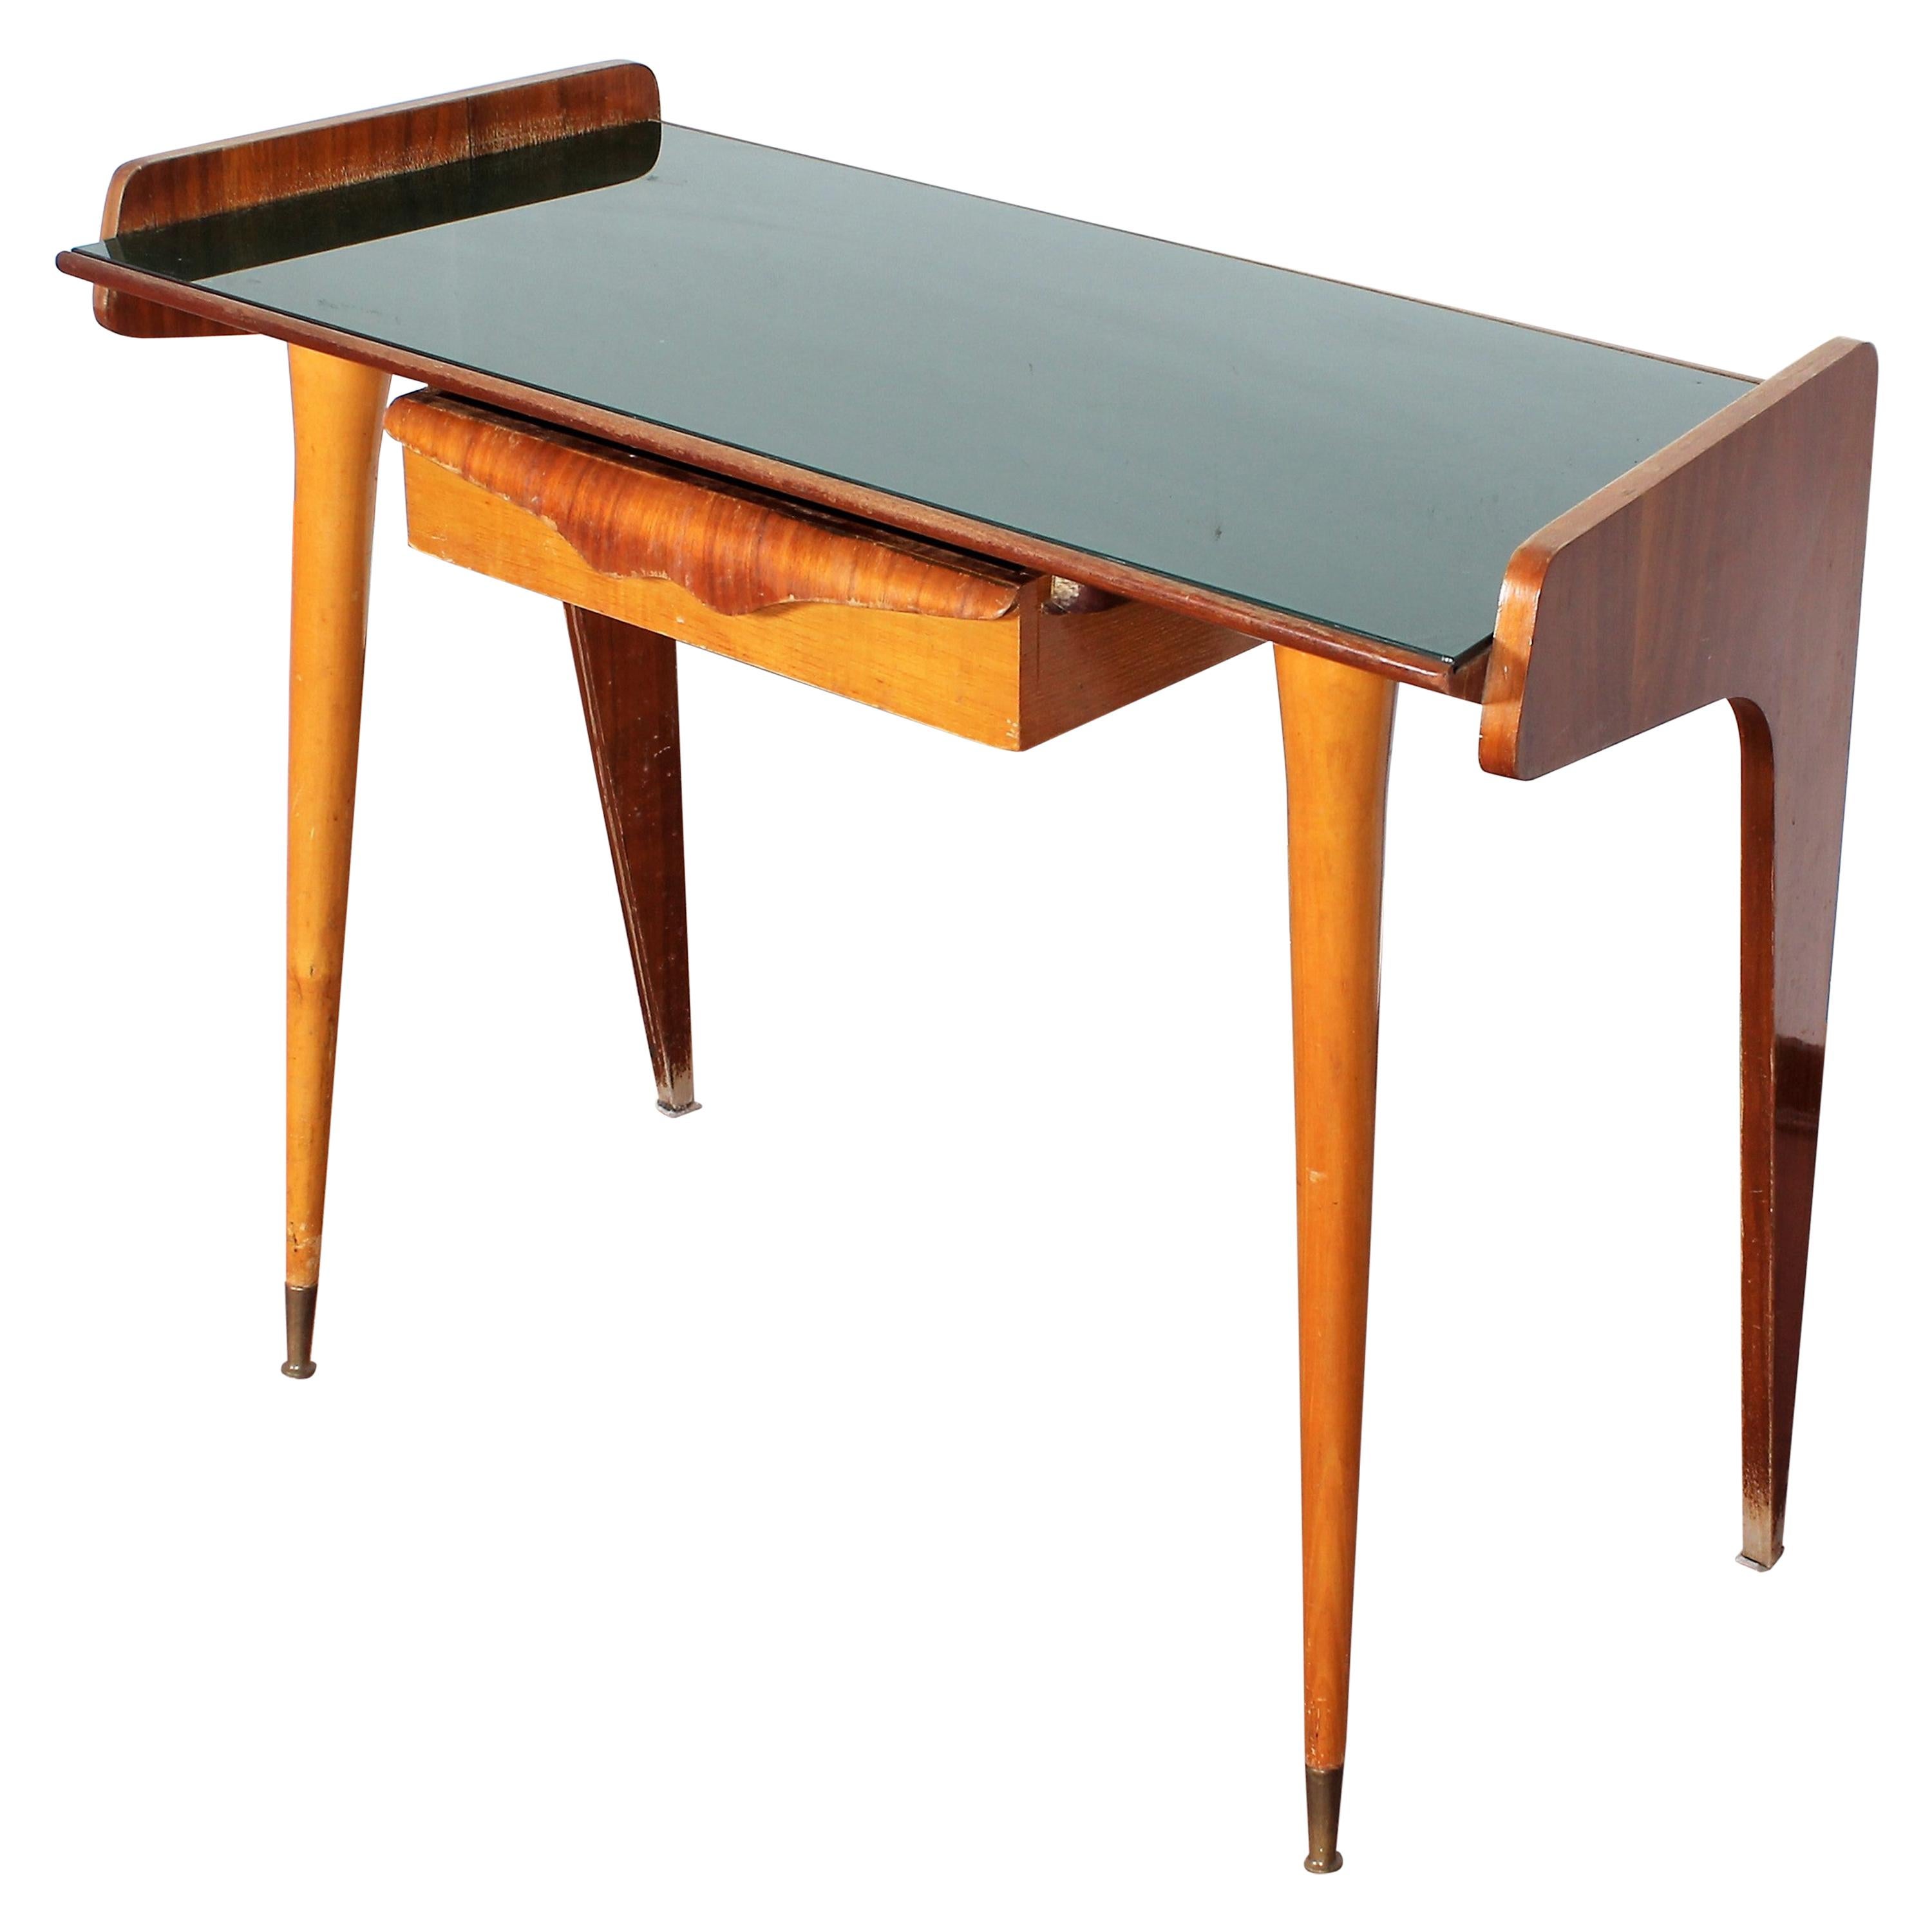 Midcentury Gio Ponti Maple Wood Console with Green Glass, Italy, 1950s